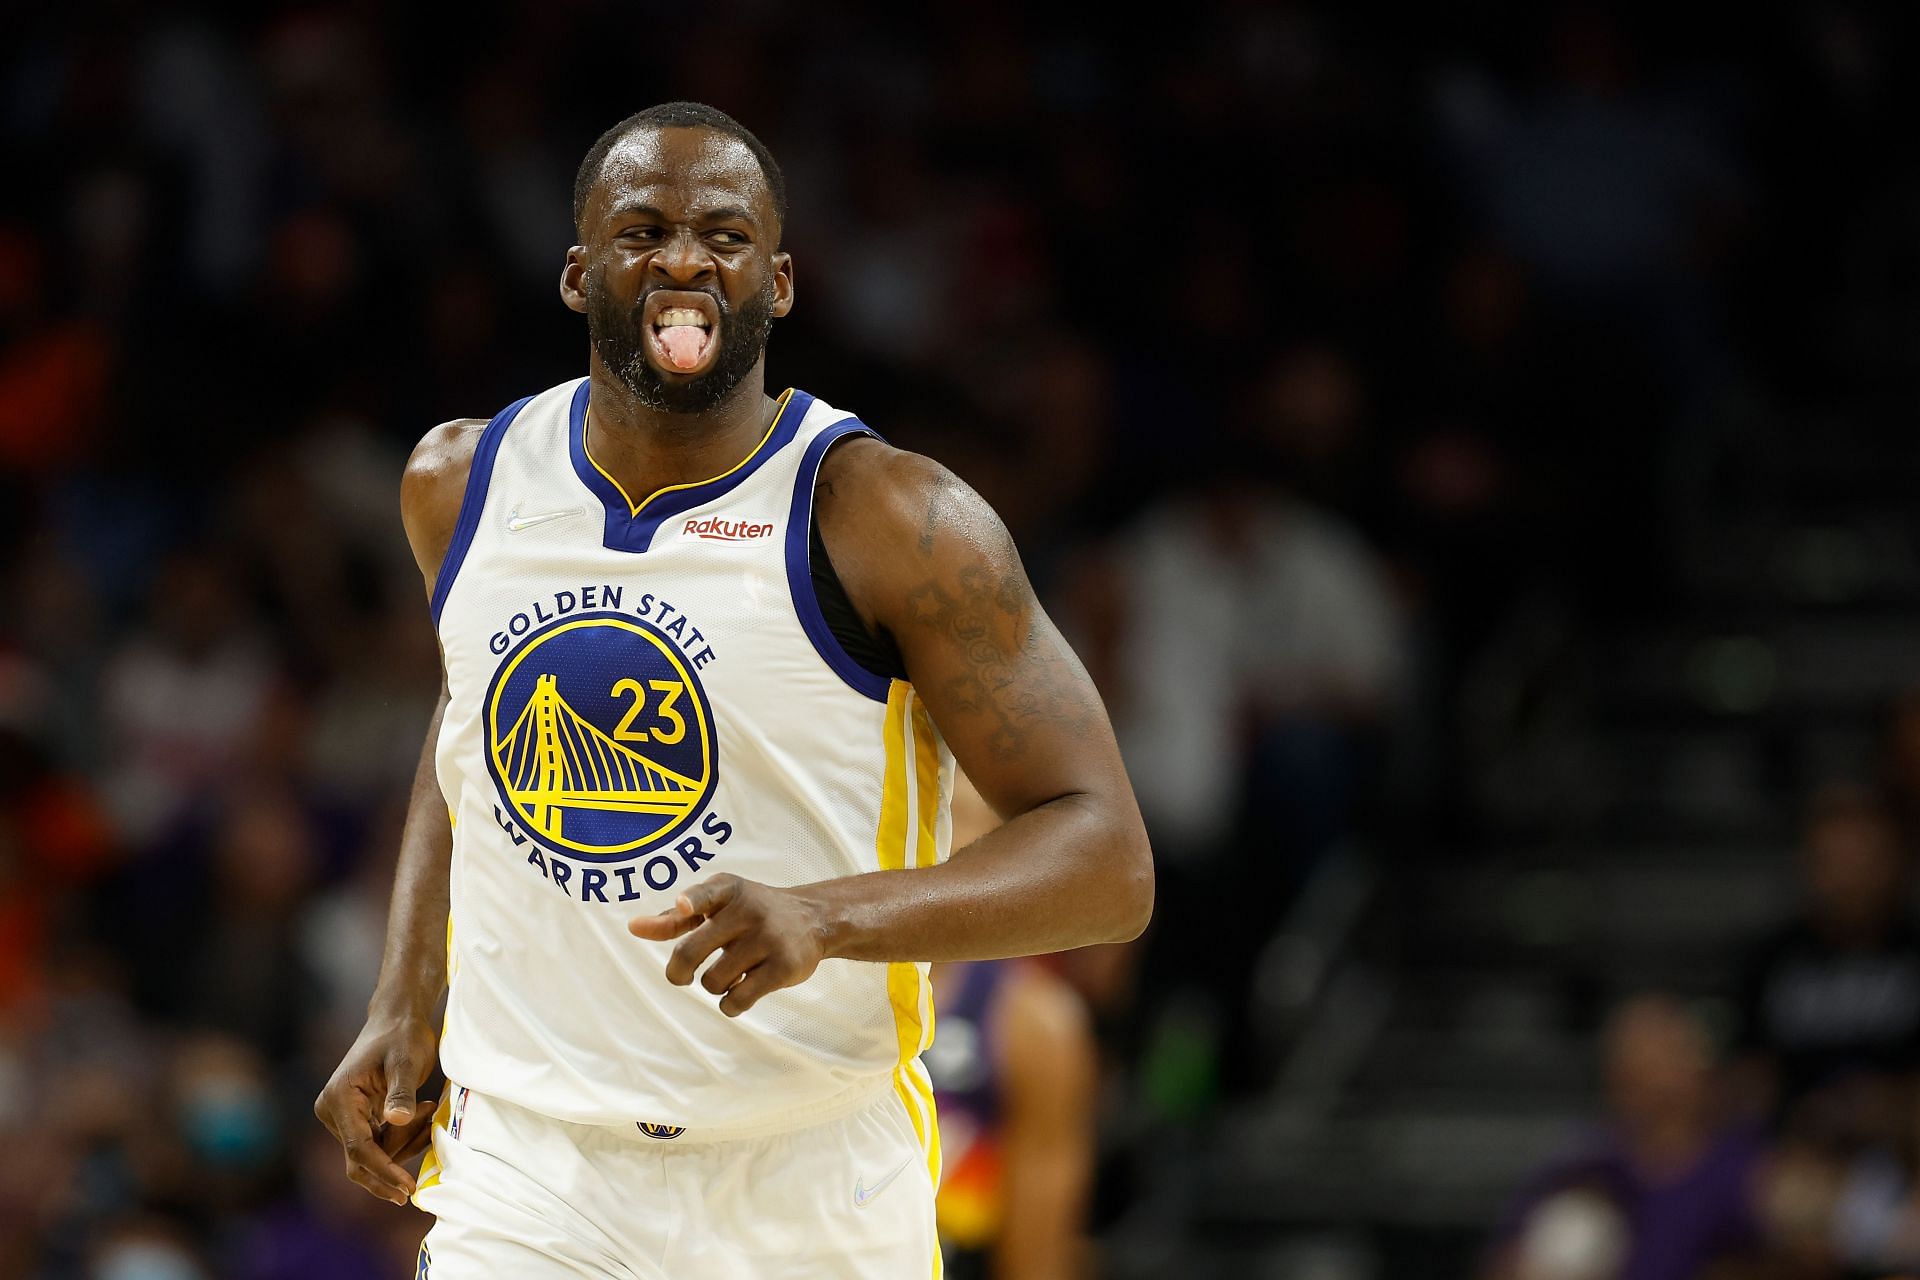 Golden State Warriors forward Draymond Green continues to be a favorite for Defensive Player of the Year.